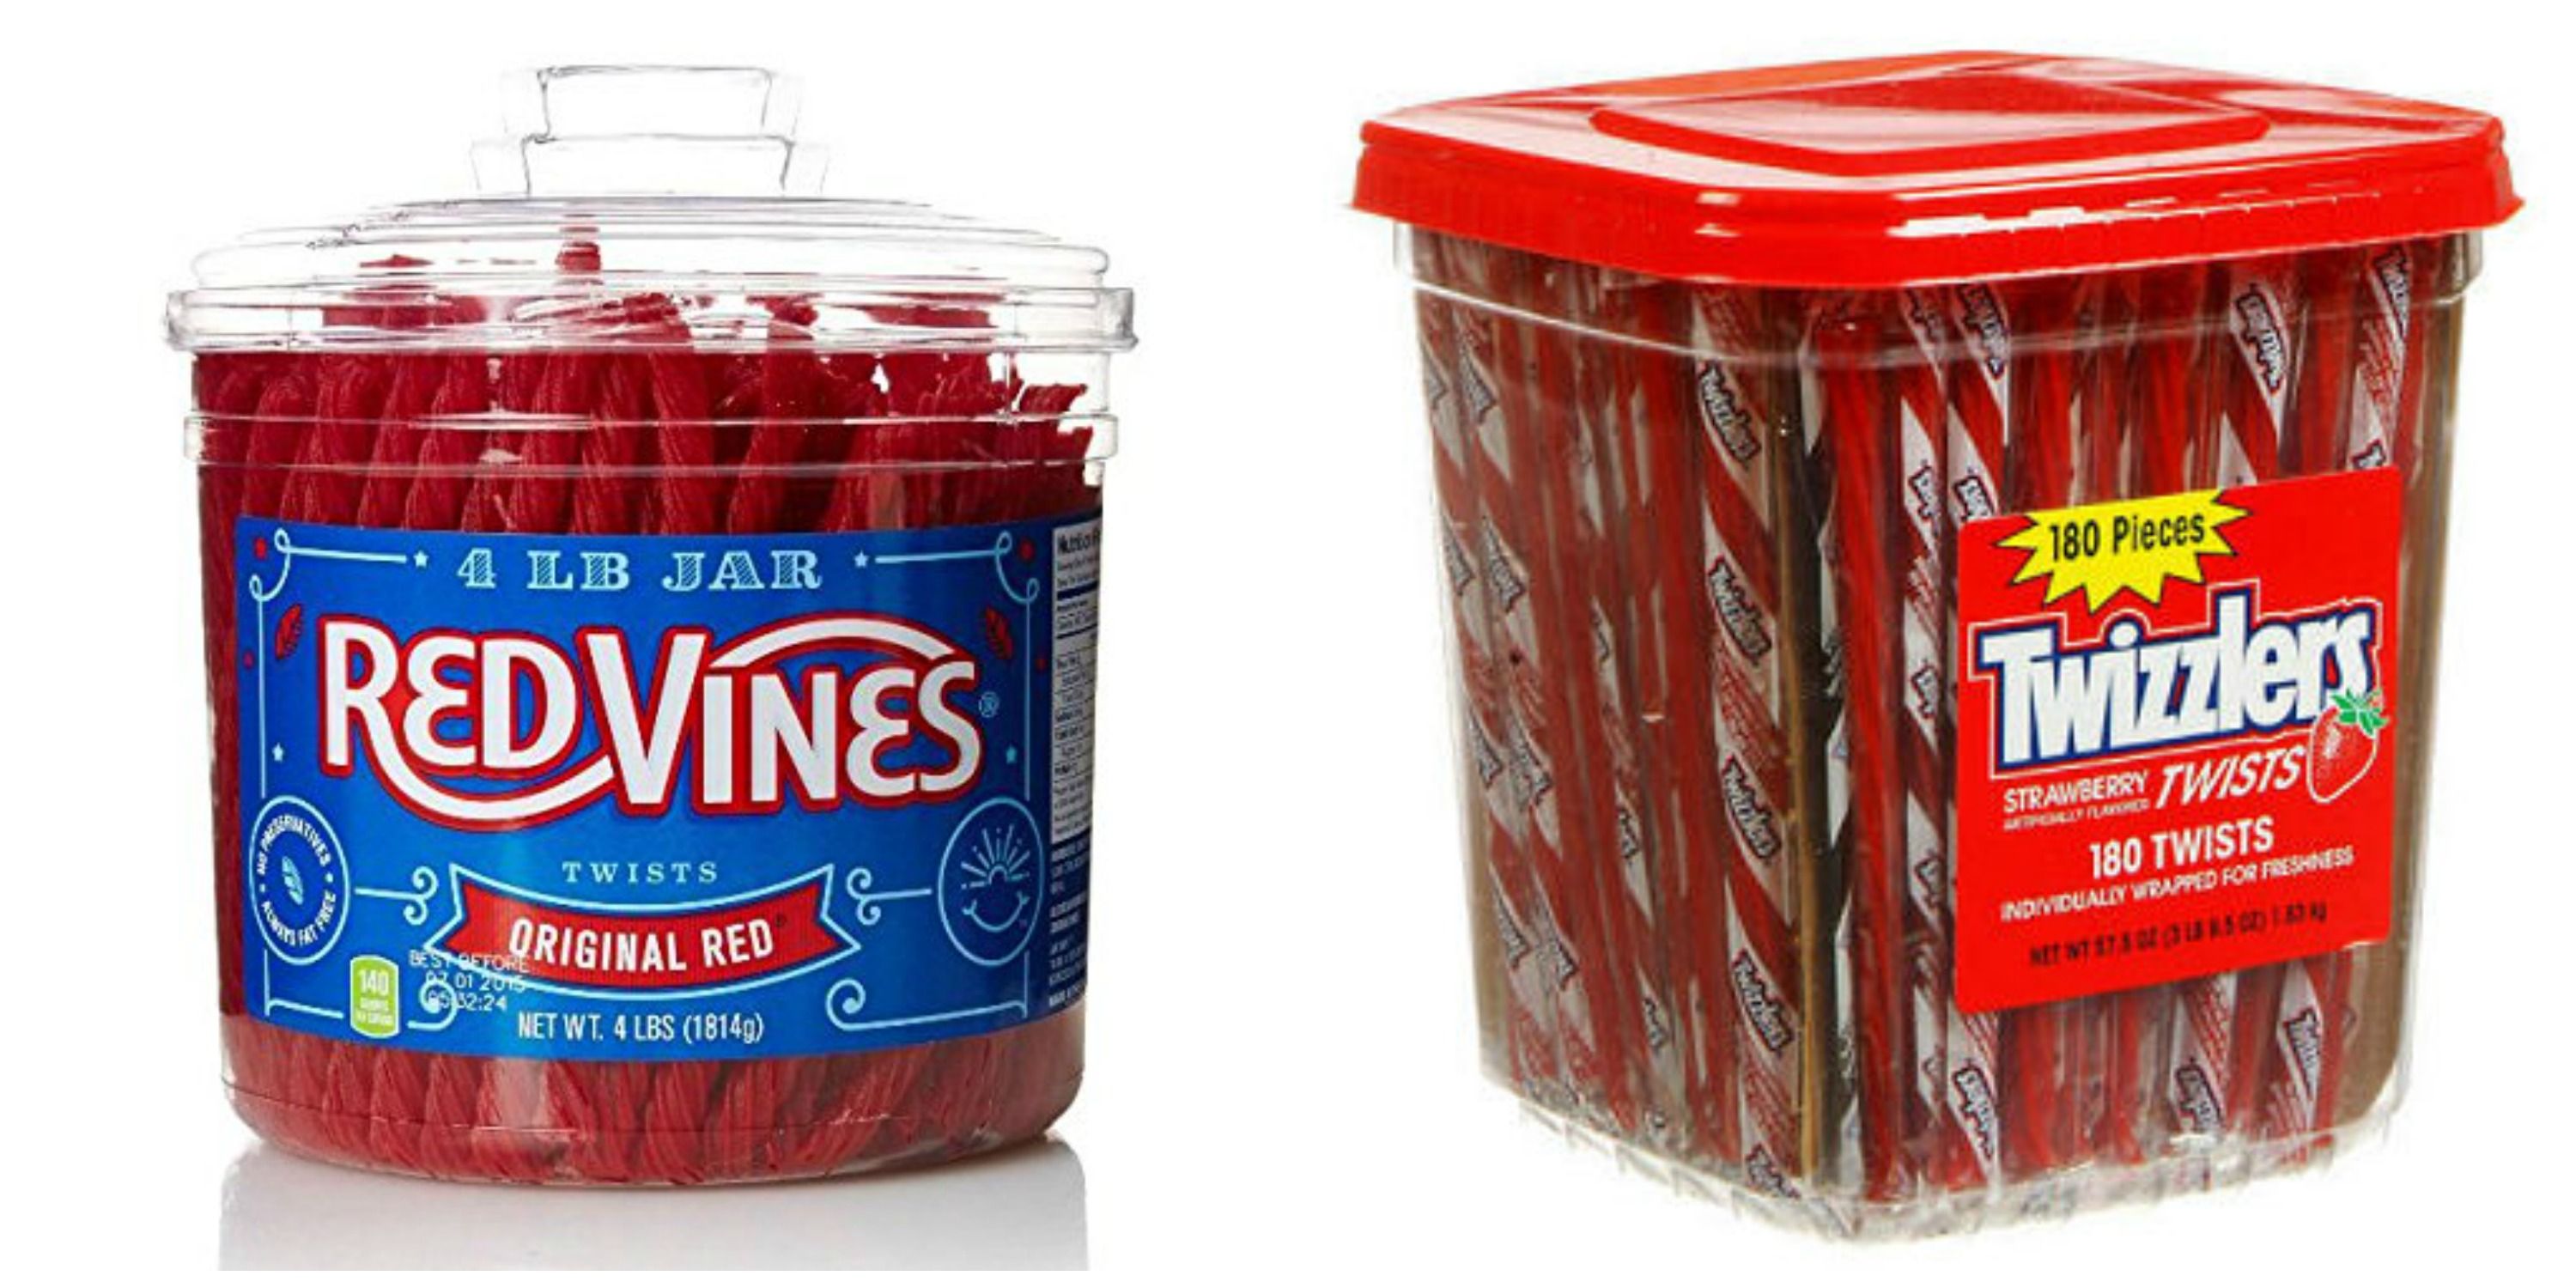 All The Reasons Vines Are Better Than Twizzlers - Delish